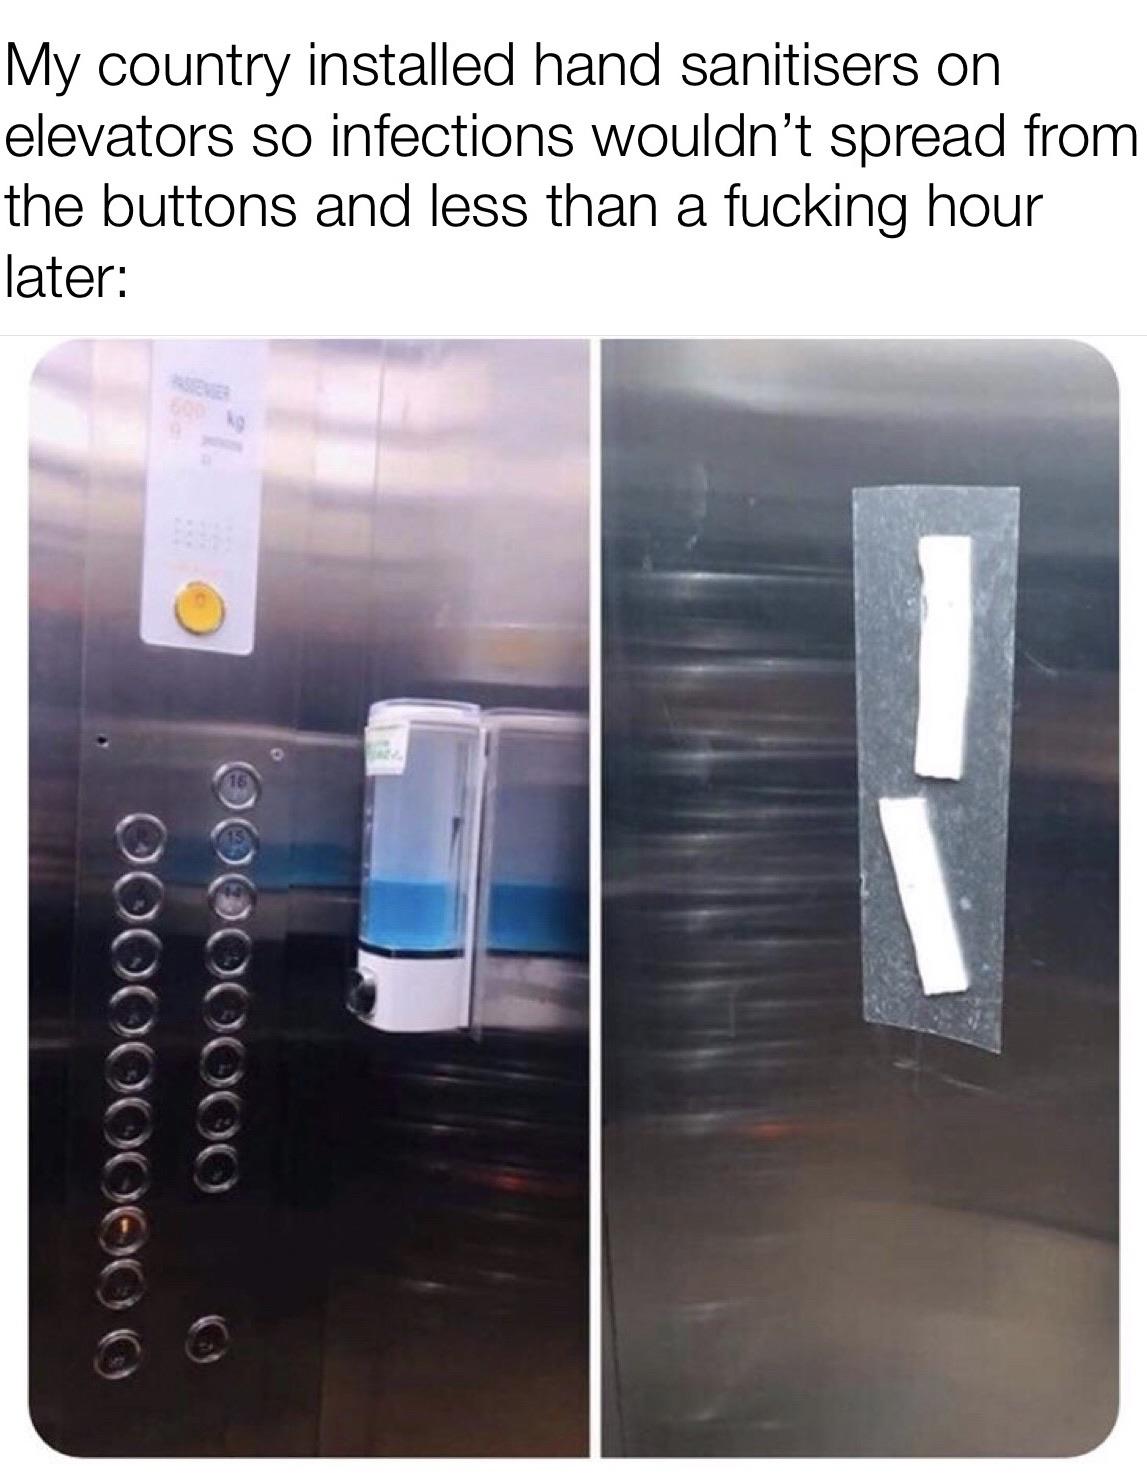 glass - My country installed hand sanitisers on elevators so infections wouldn't spread from the buttons and less than a fucking hour later 0000000000 00000000